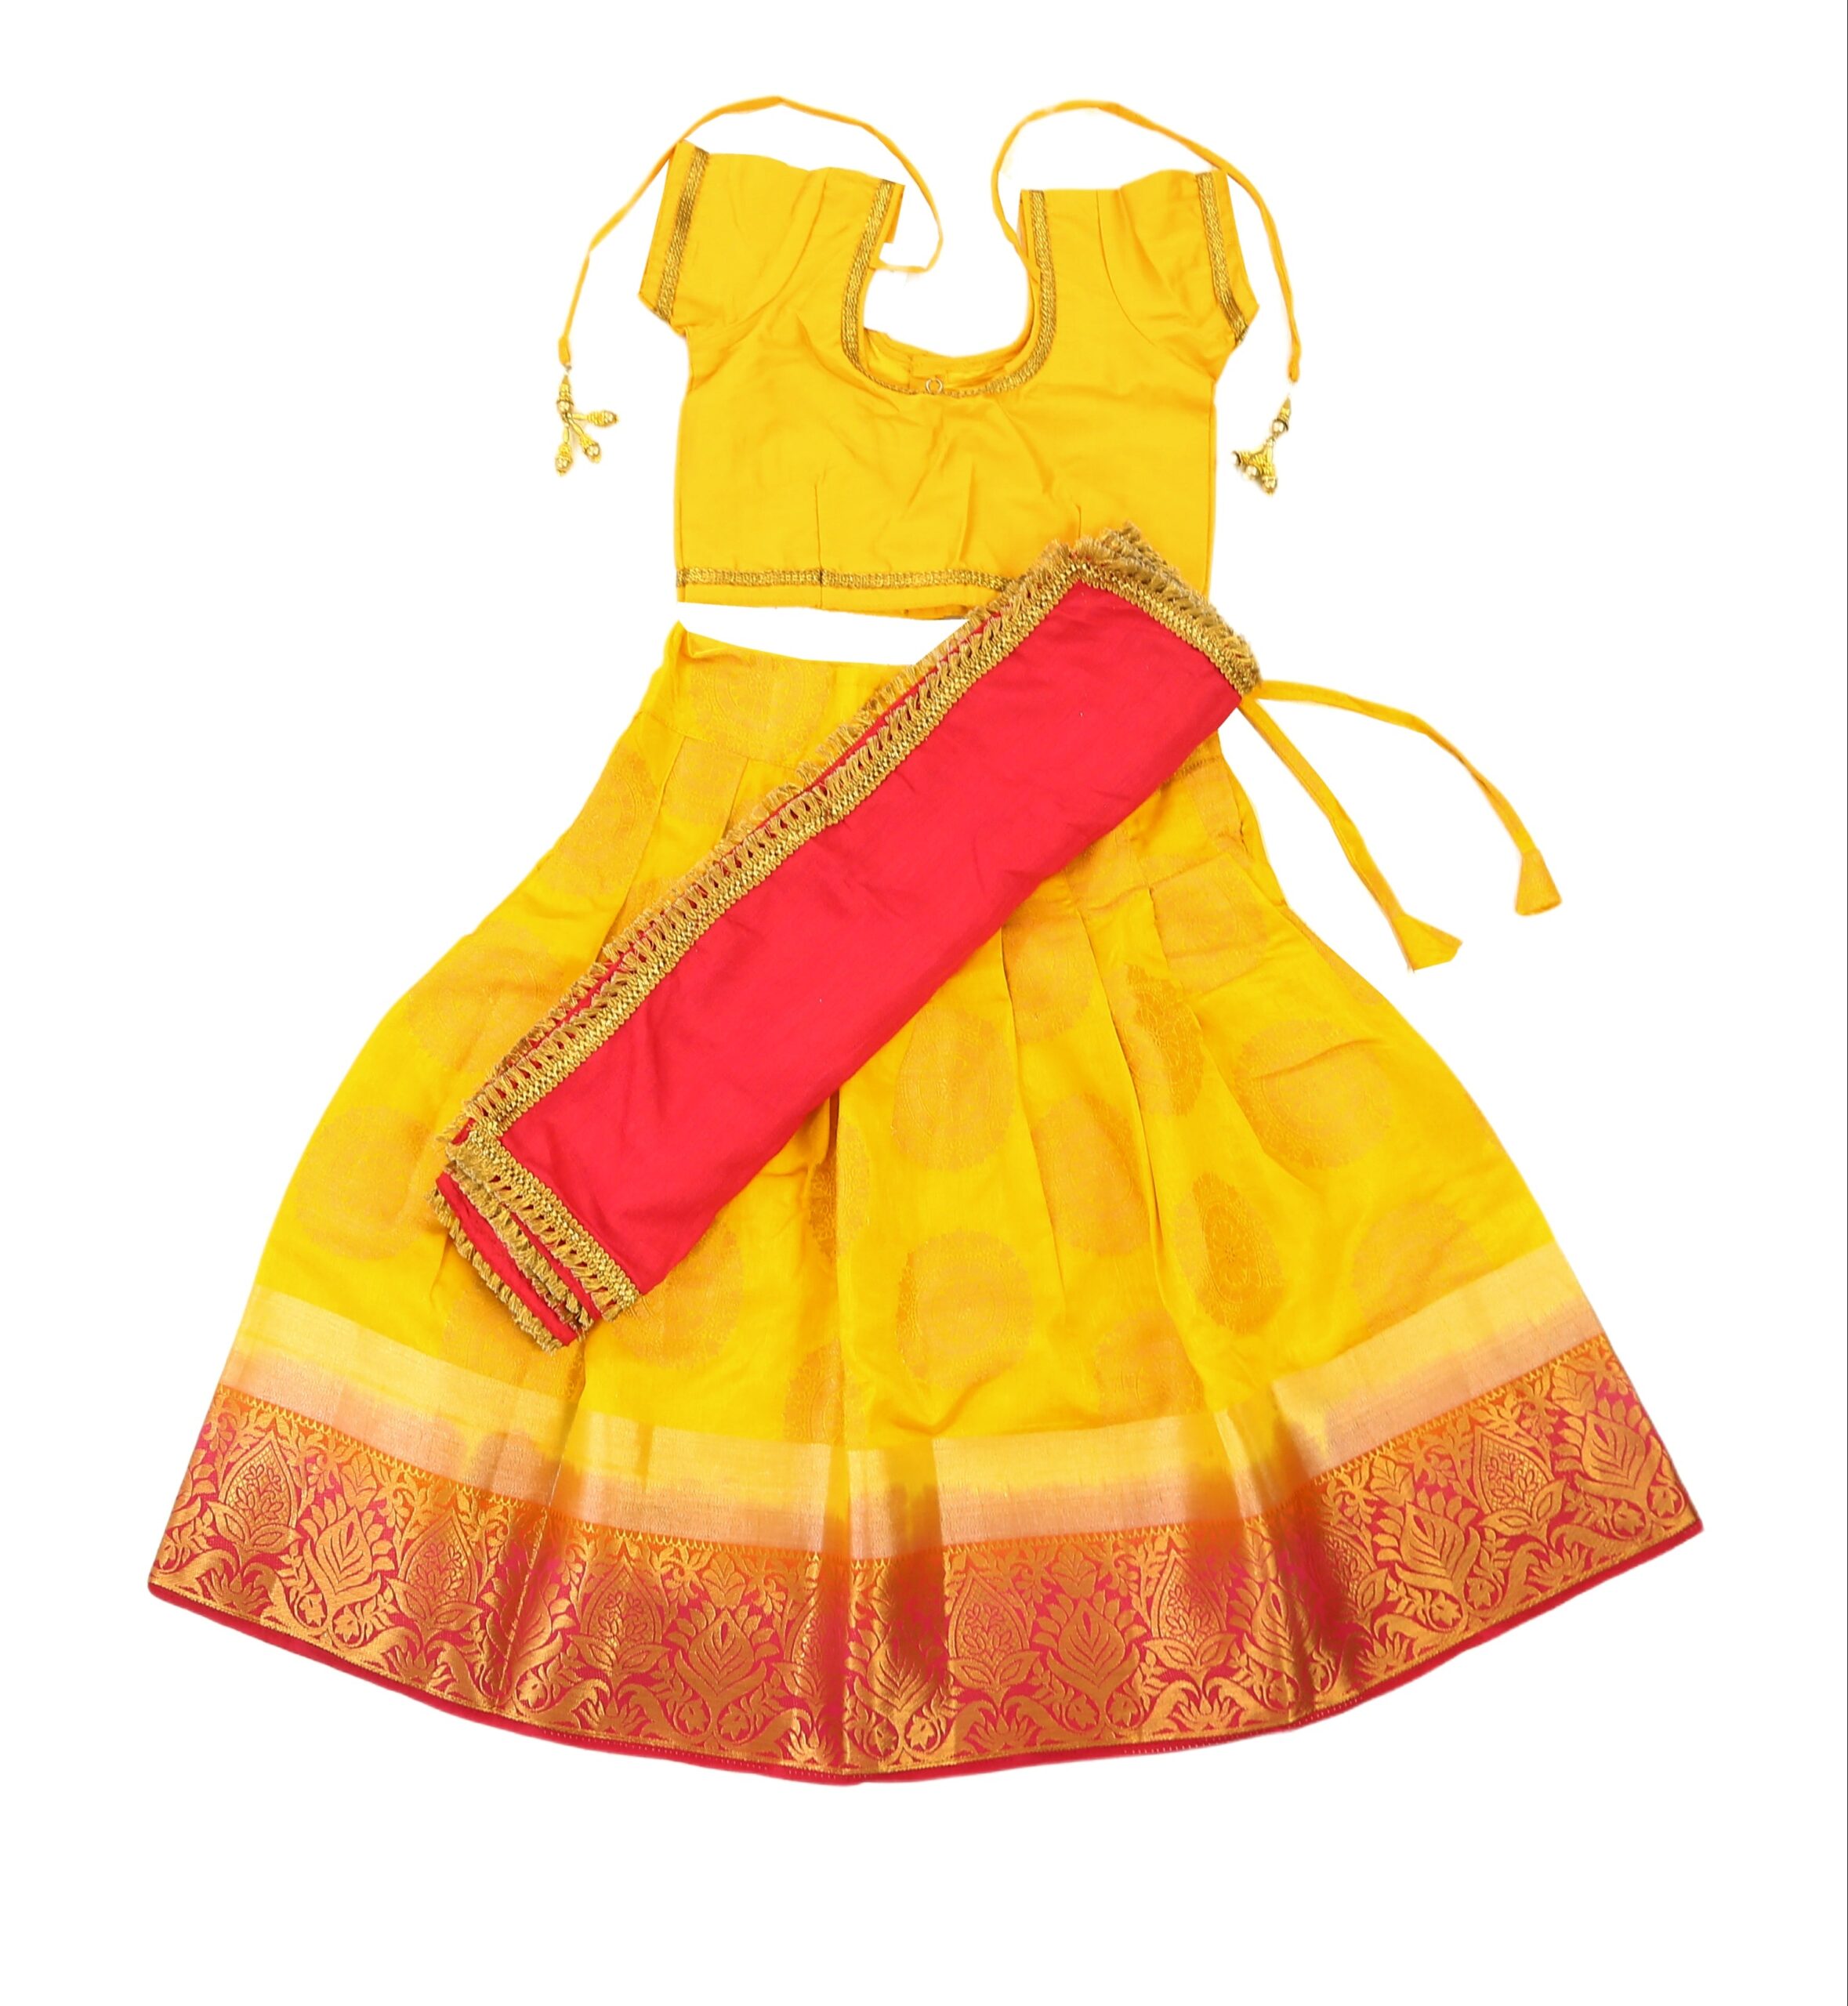 Buy easy to wear saree for kids 6-7 years at Amazon.in